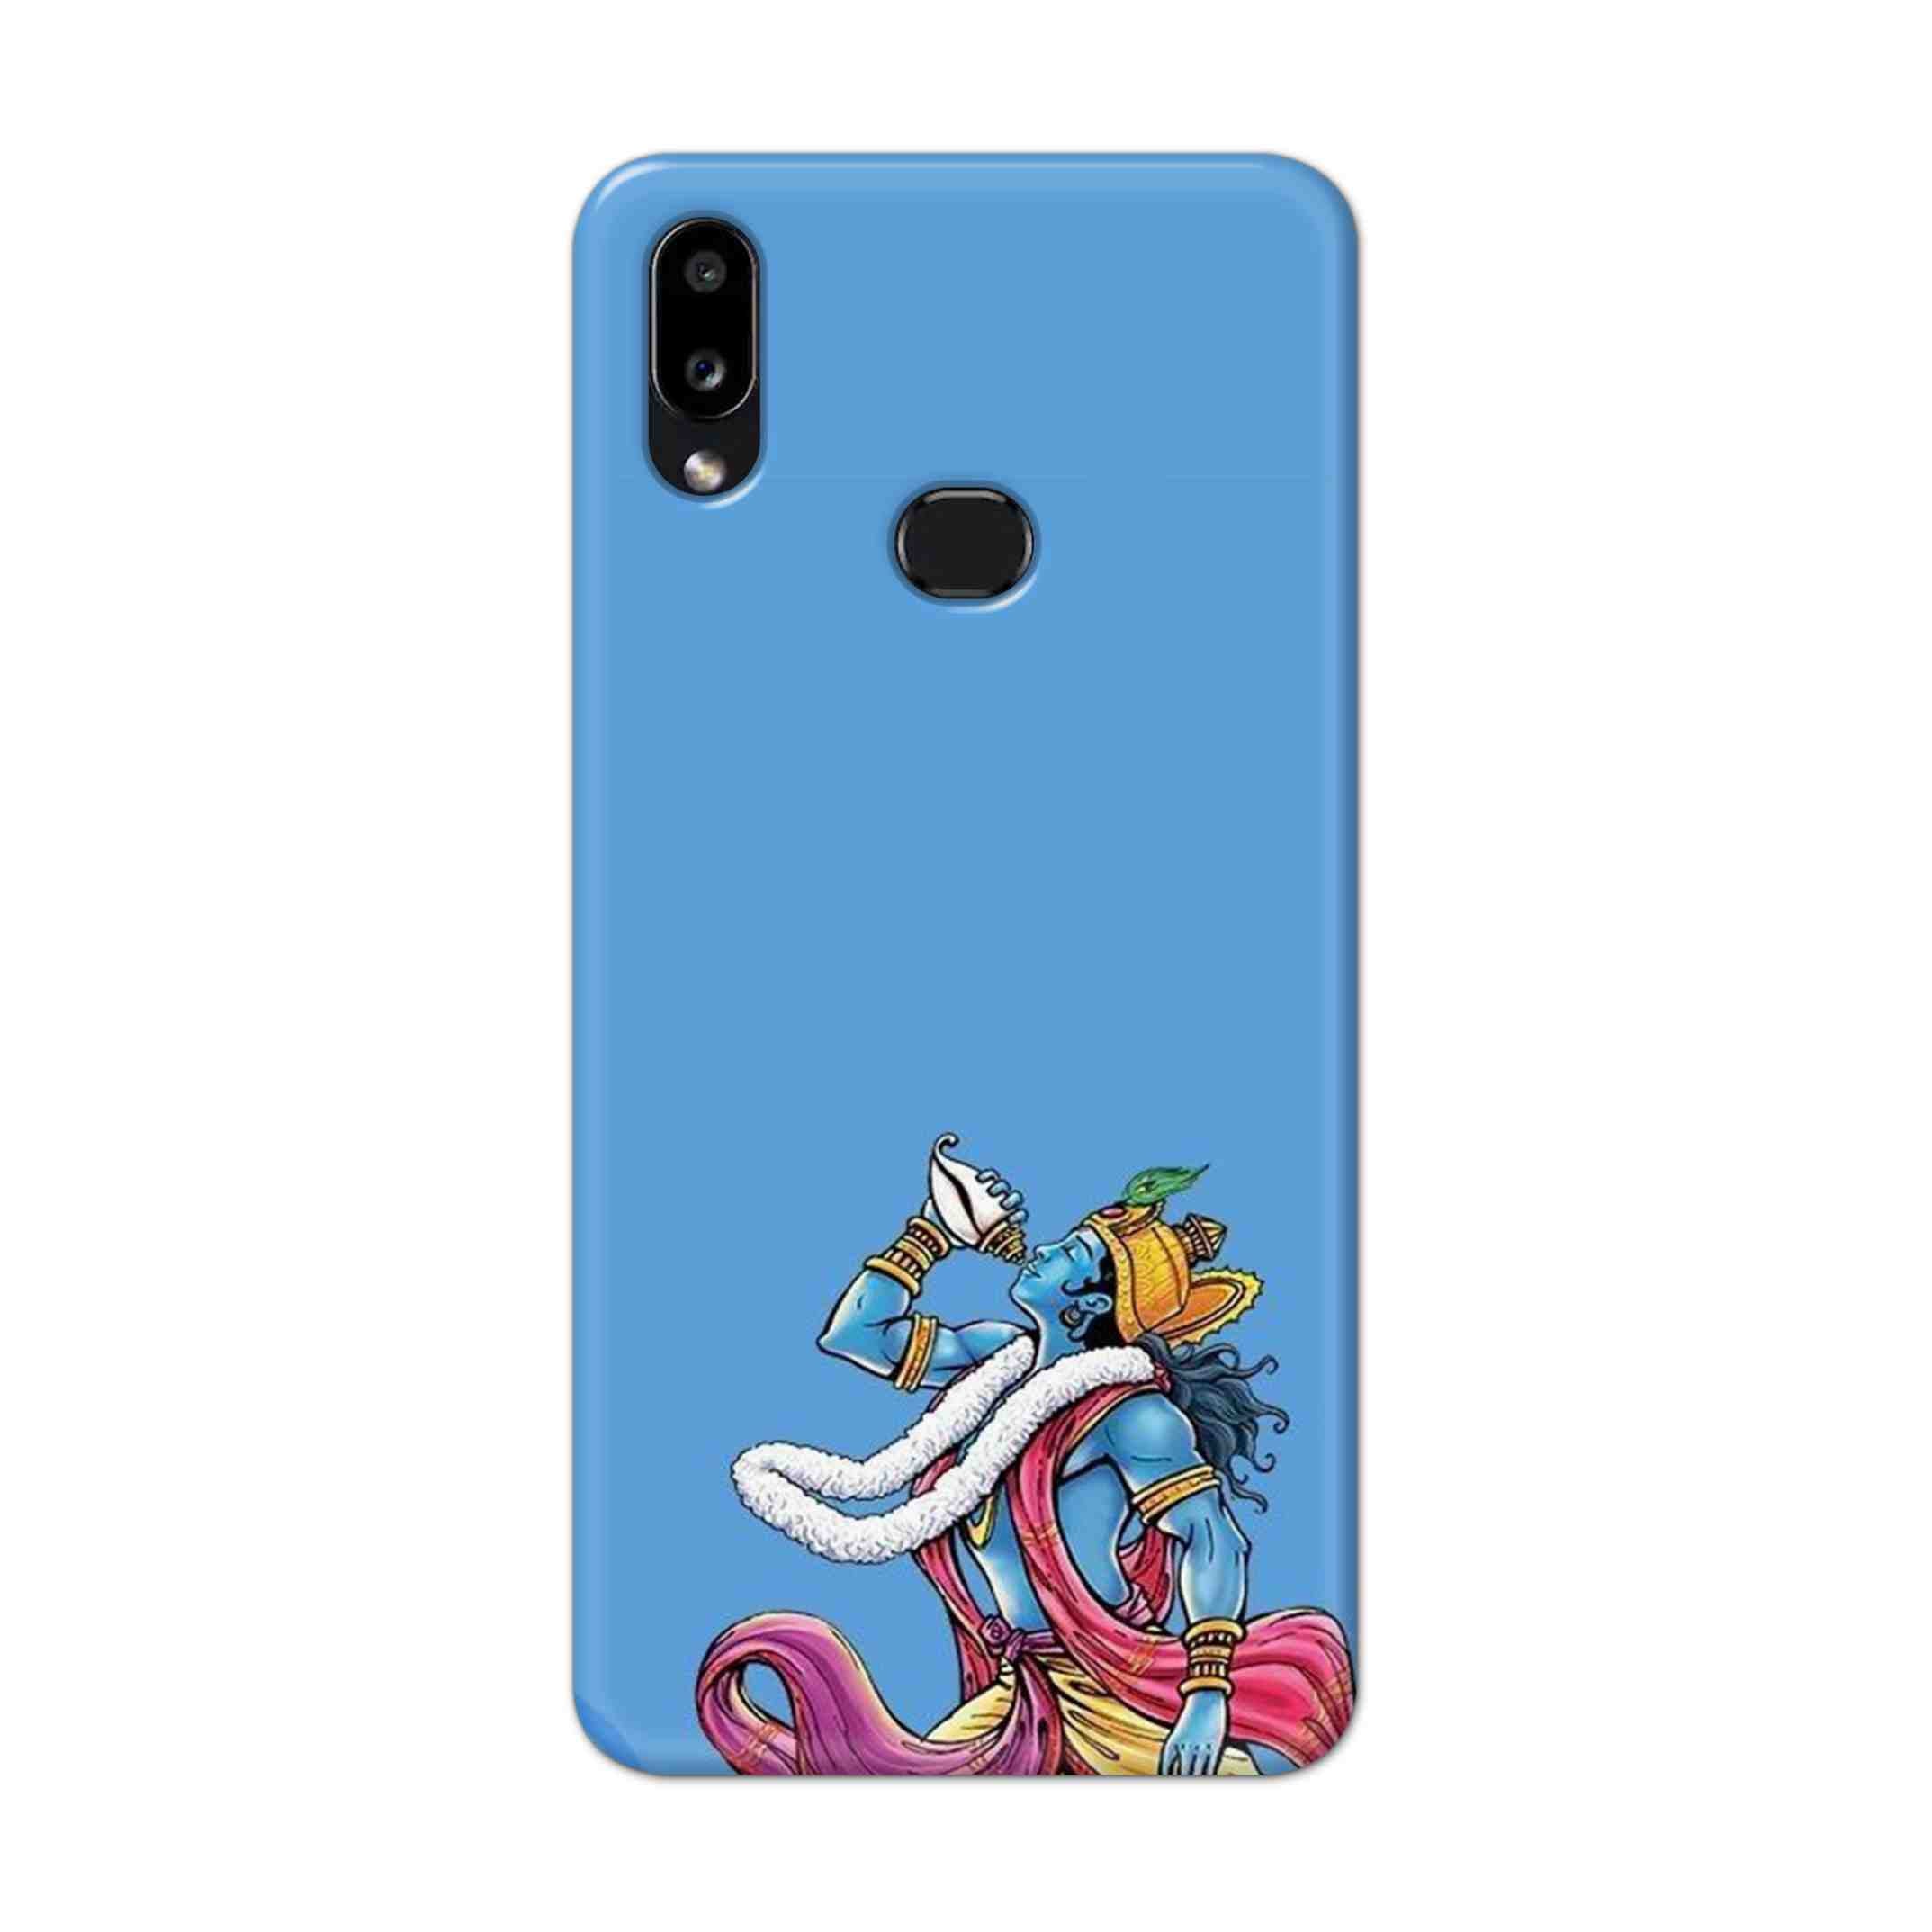 Buy Krishna Hard Back Mobile Phone Case Cover For Samsung Galaxy M01s Online